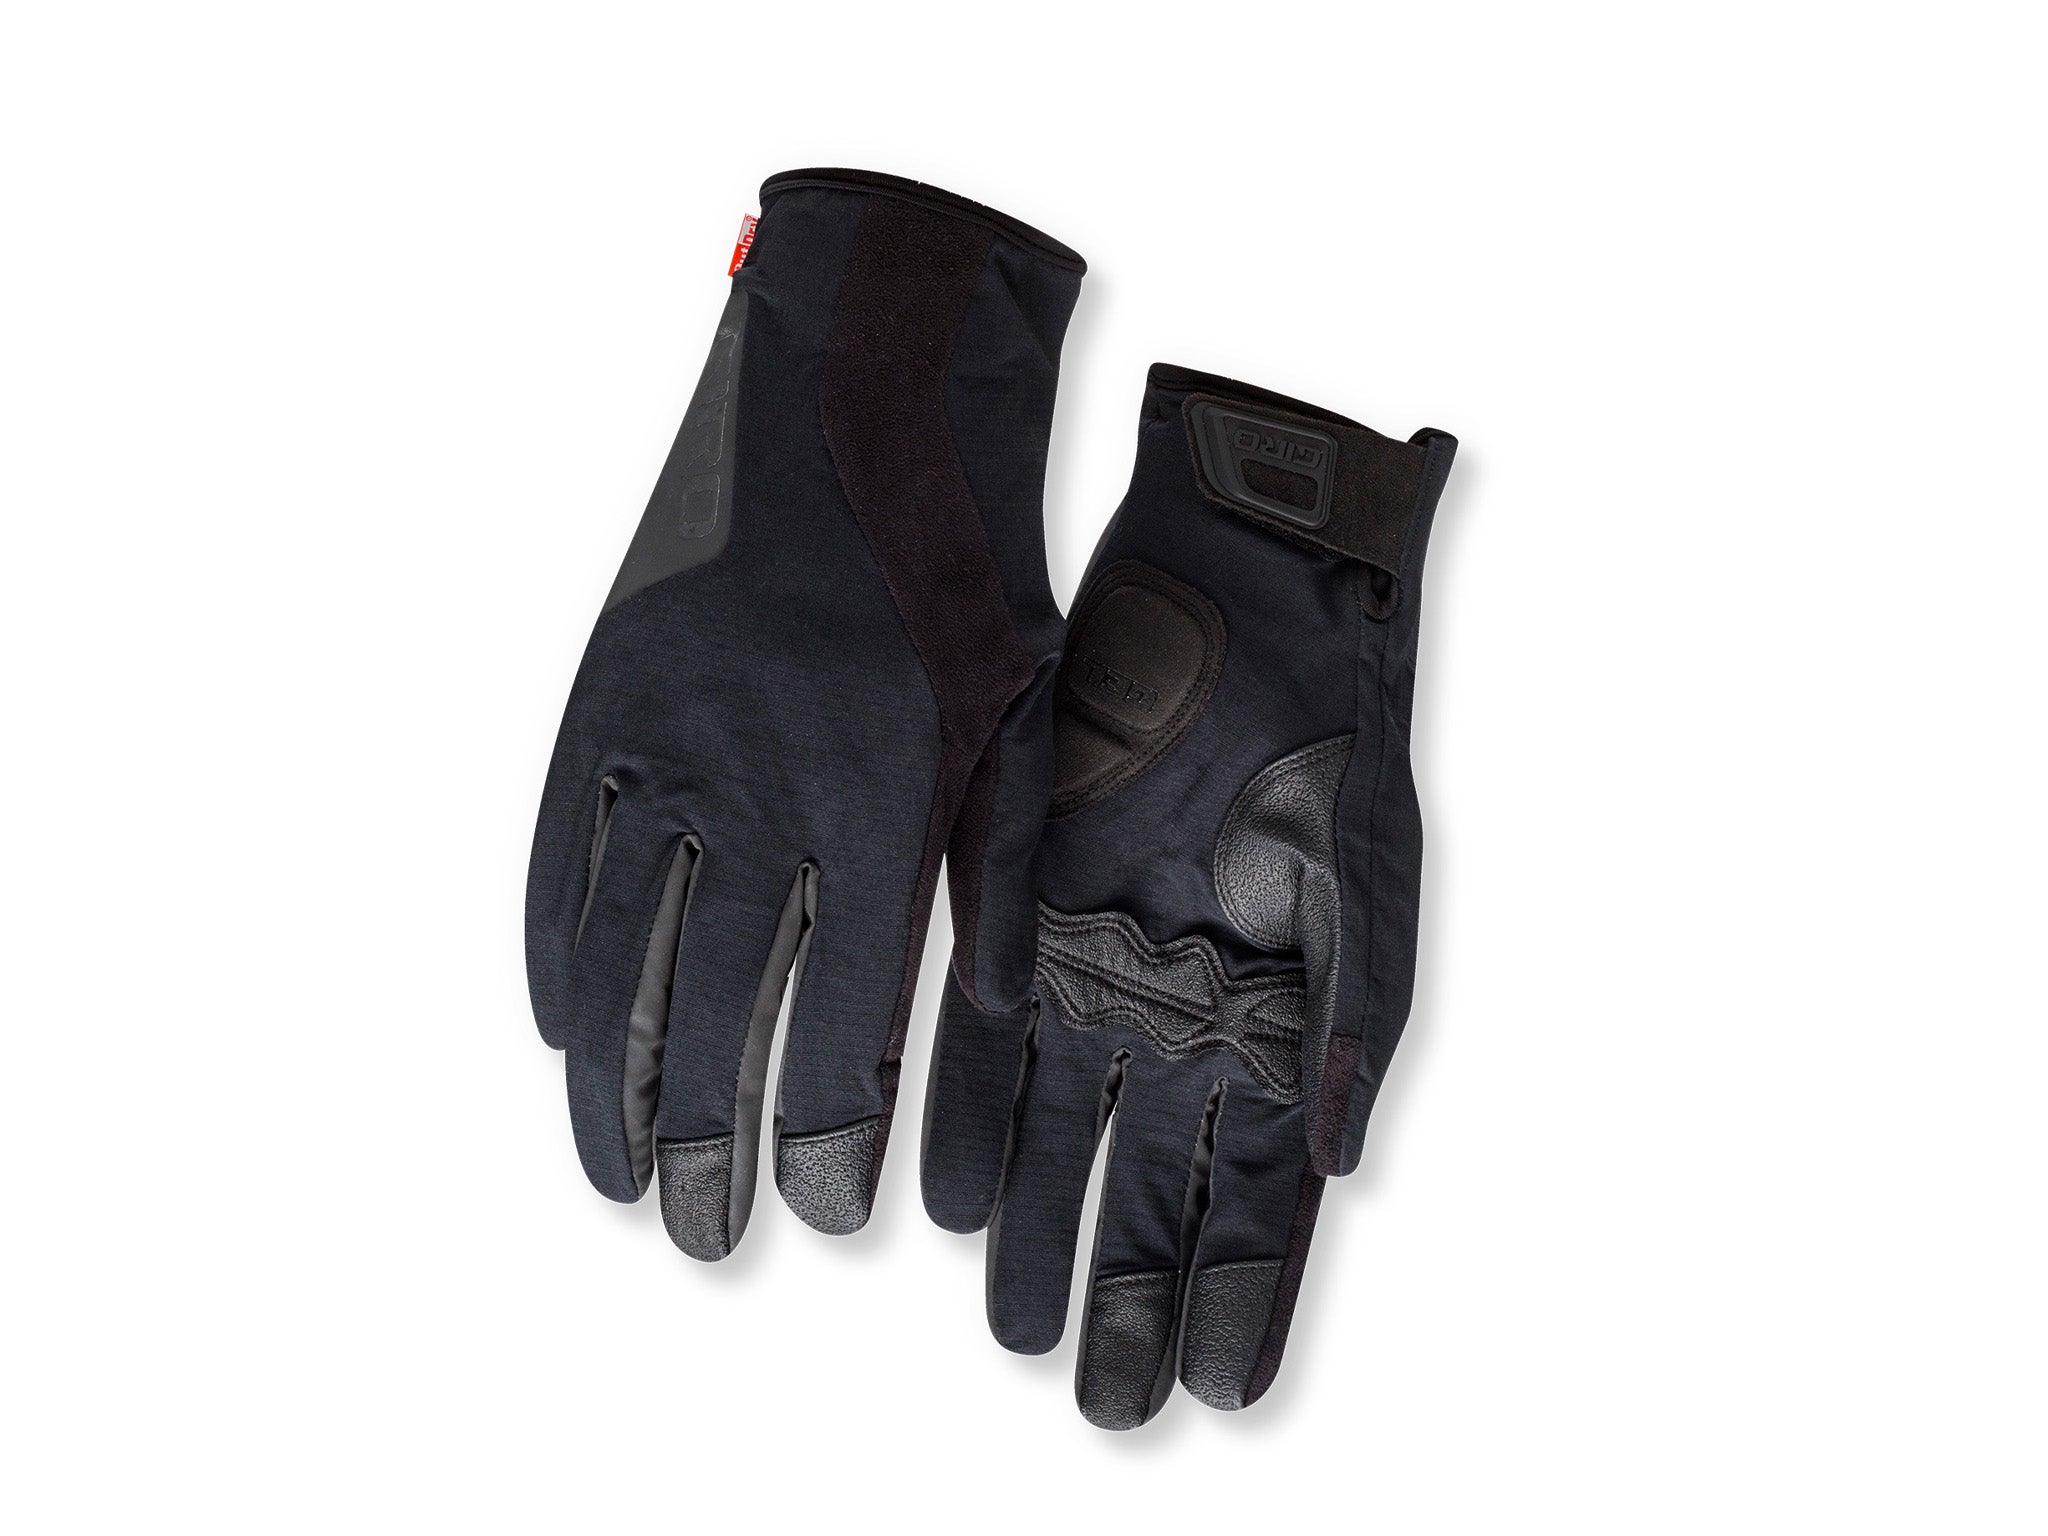 dhb windproof cycling gloves